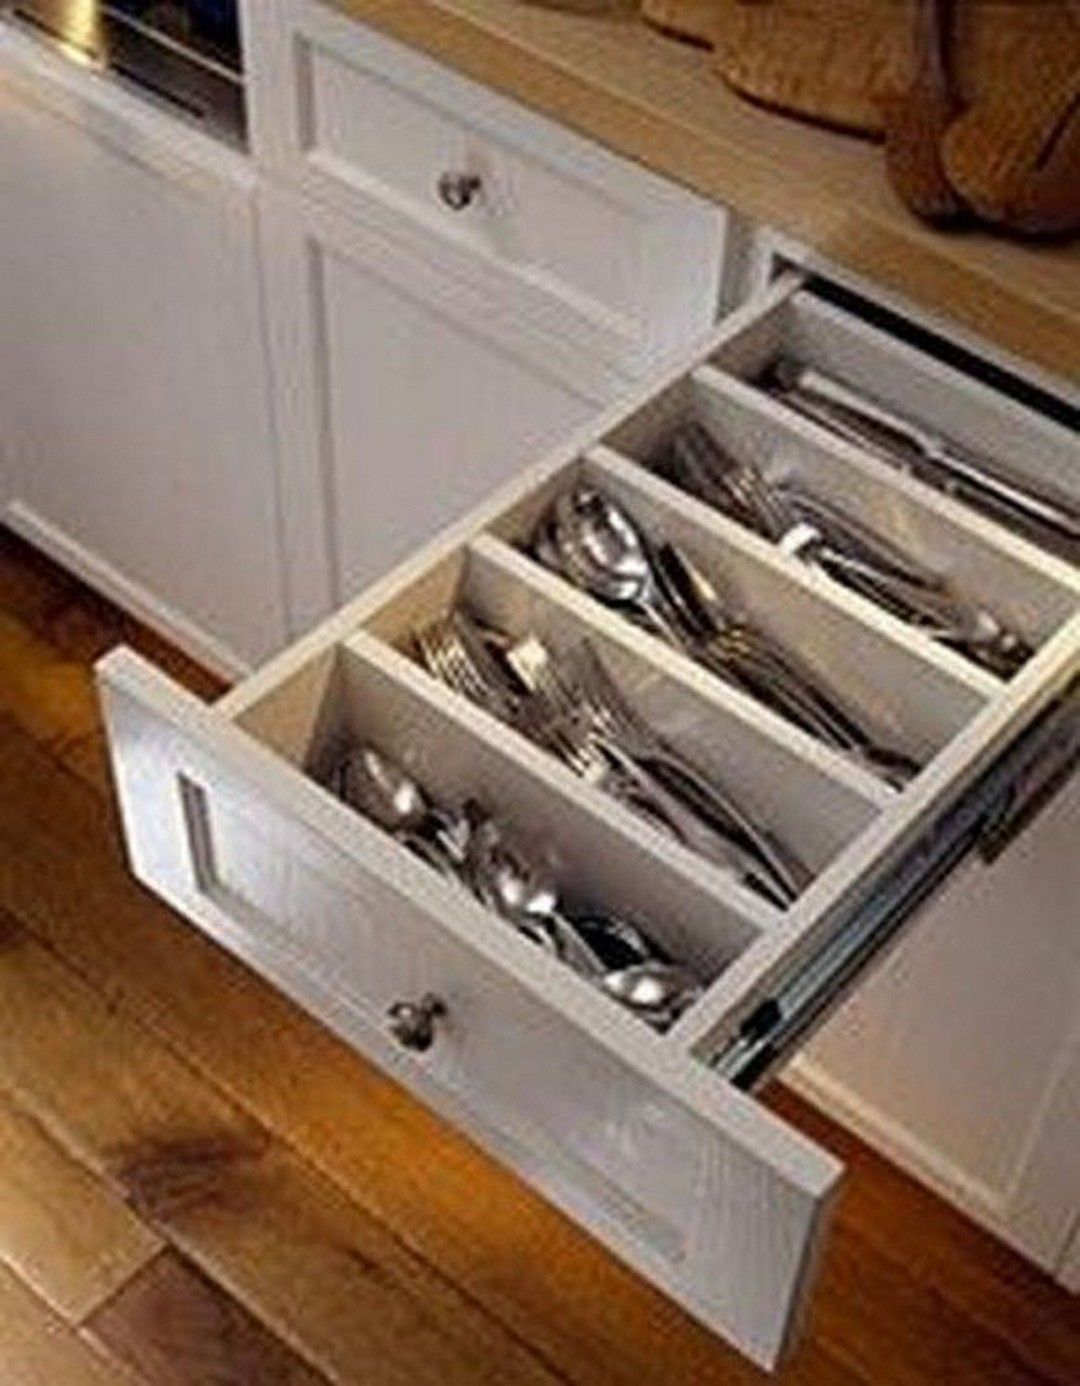 36 Inexpensive Kitchen Storage Ideas for a Tidy Kitchen and Cleaner Cabinets -   23 diy projects Storage kitchen cabinets ideas